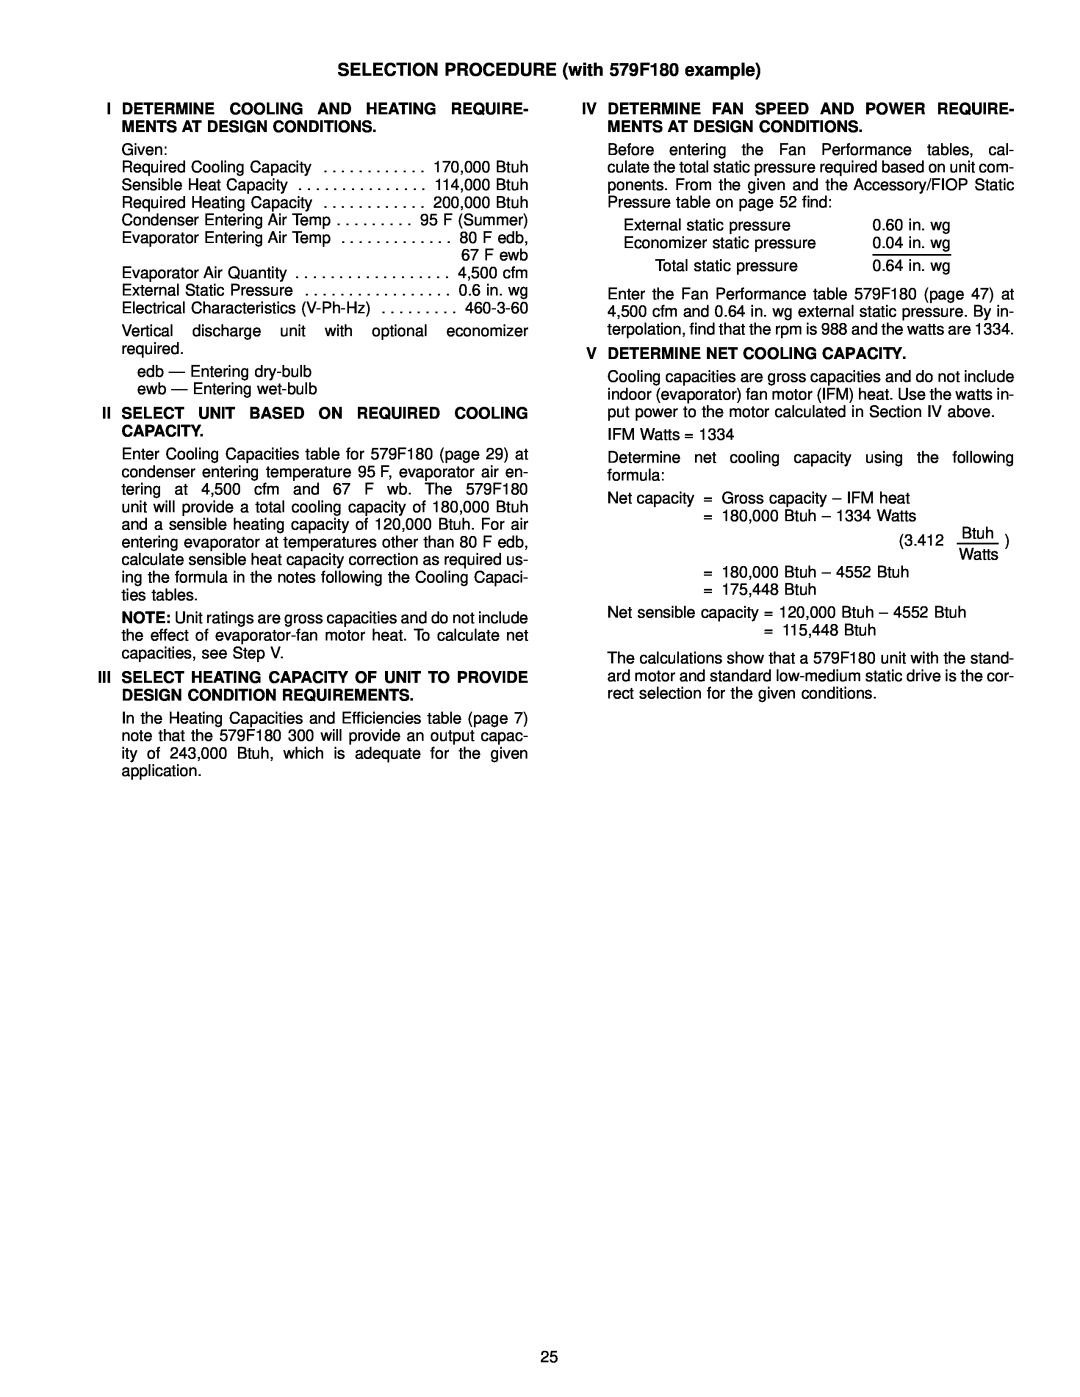 Bryant 580D manual SELECTION PROCEDURE with 579F180 example 